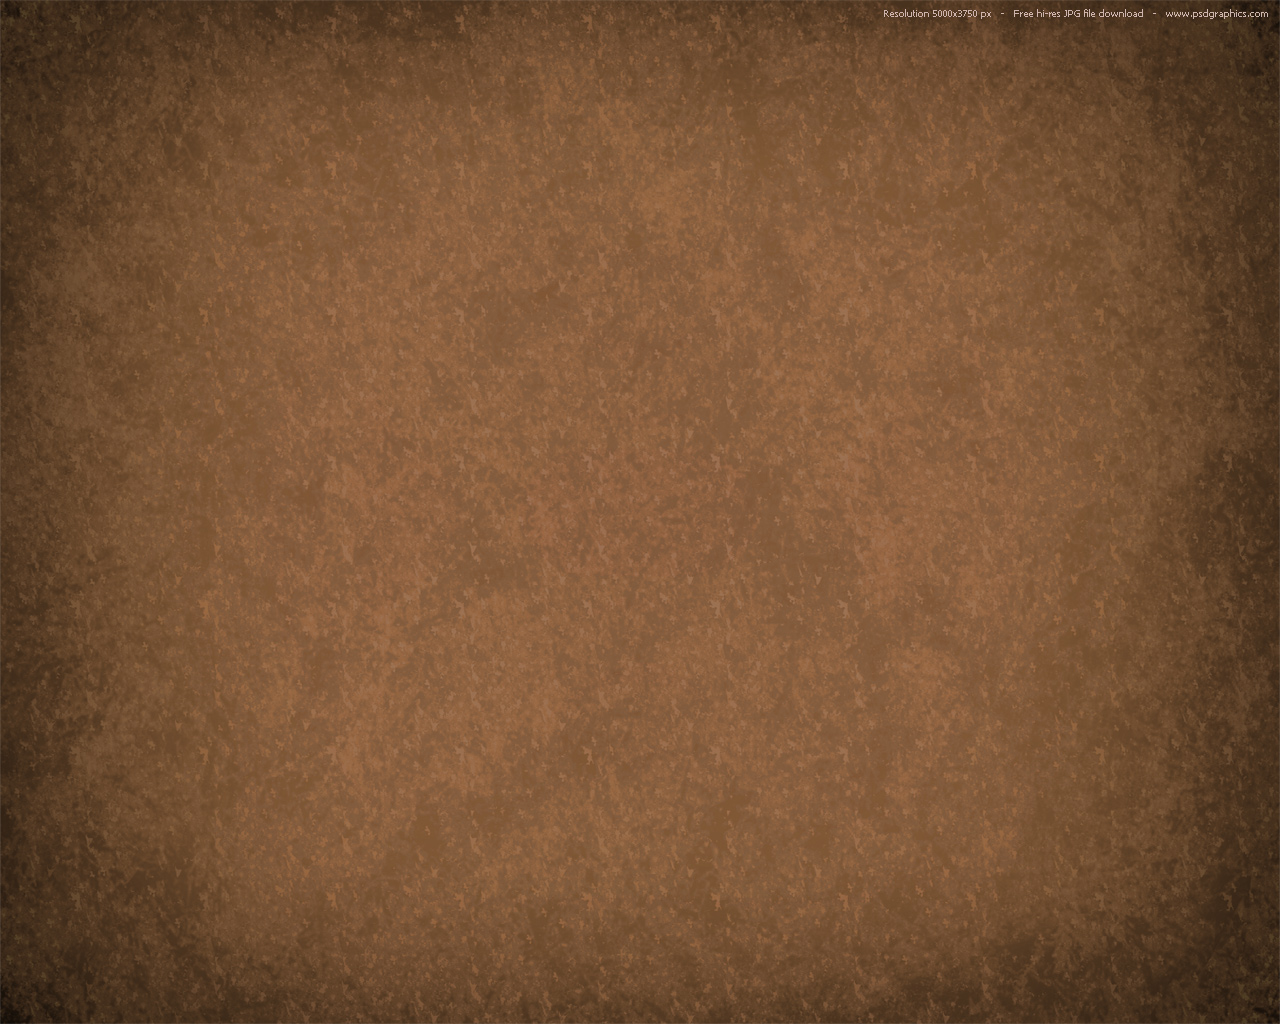 Red And Brown Grunge Background